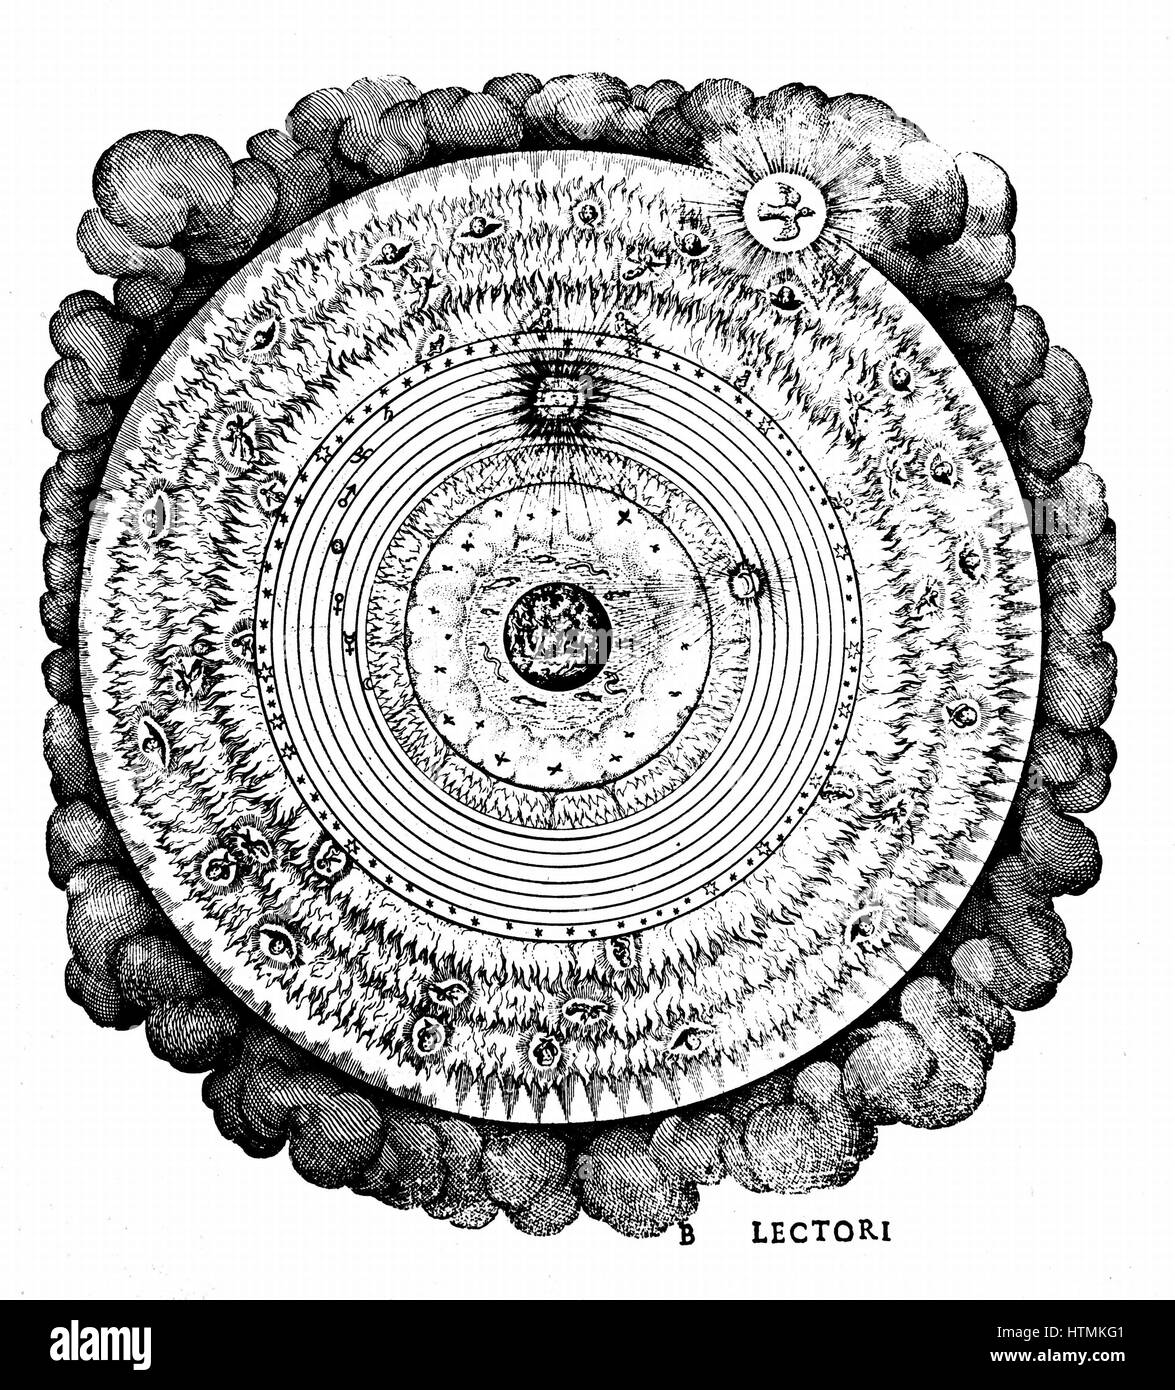 Geocentric universe showing the Earth surrounded by the spheres of water, air and fire, and by the spheres of the Moon, Sun and planets and the sphere of the fixed stars. Beyond these lies Heaven with the hierarchies of angels and the abode of God, repres Stock Photo